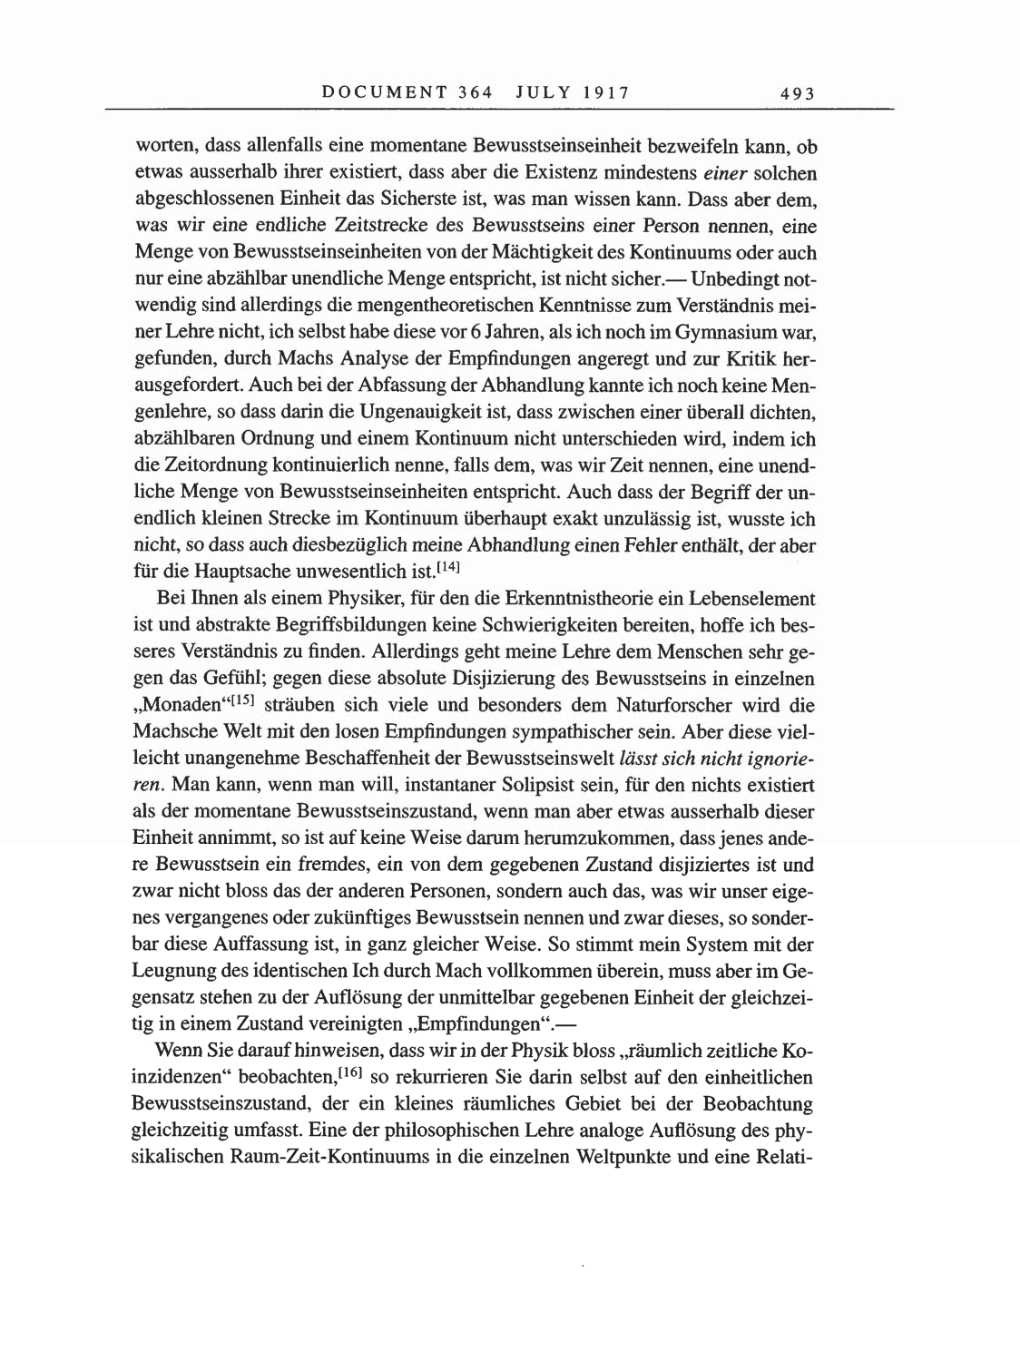 Volume 8, Part A: The Berlin Years: Correspondence 1914-1917 page 493